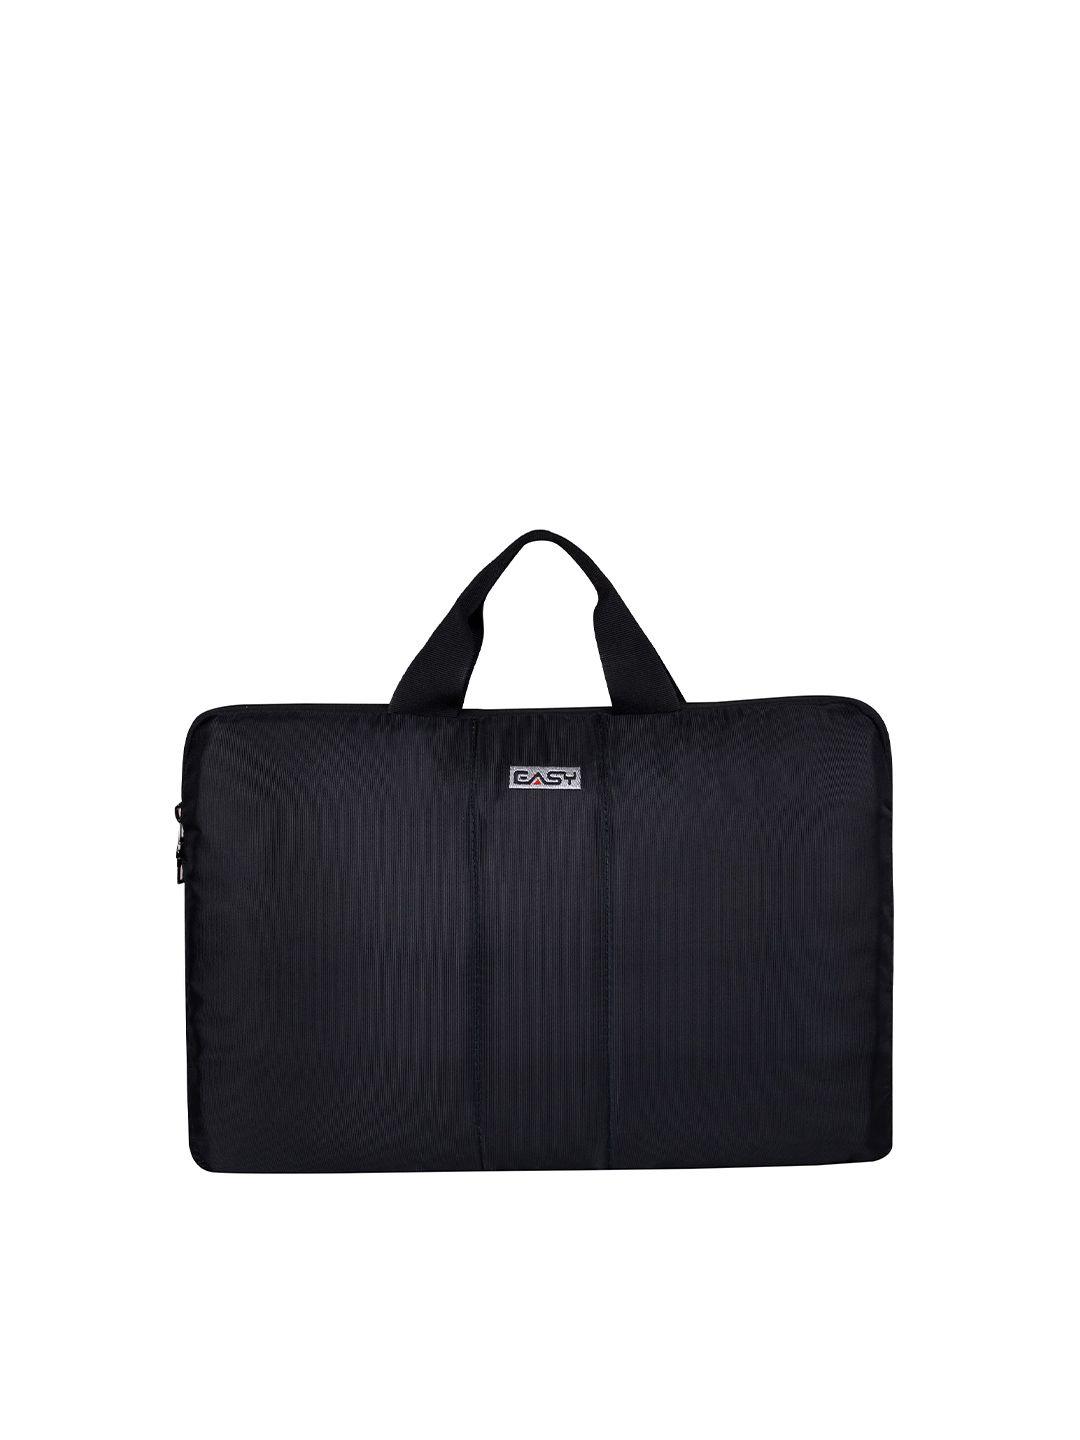 easy laptop sleeve with non-detachable sling strap